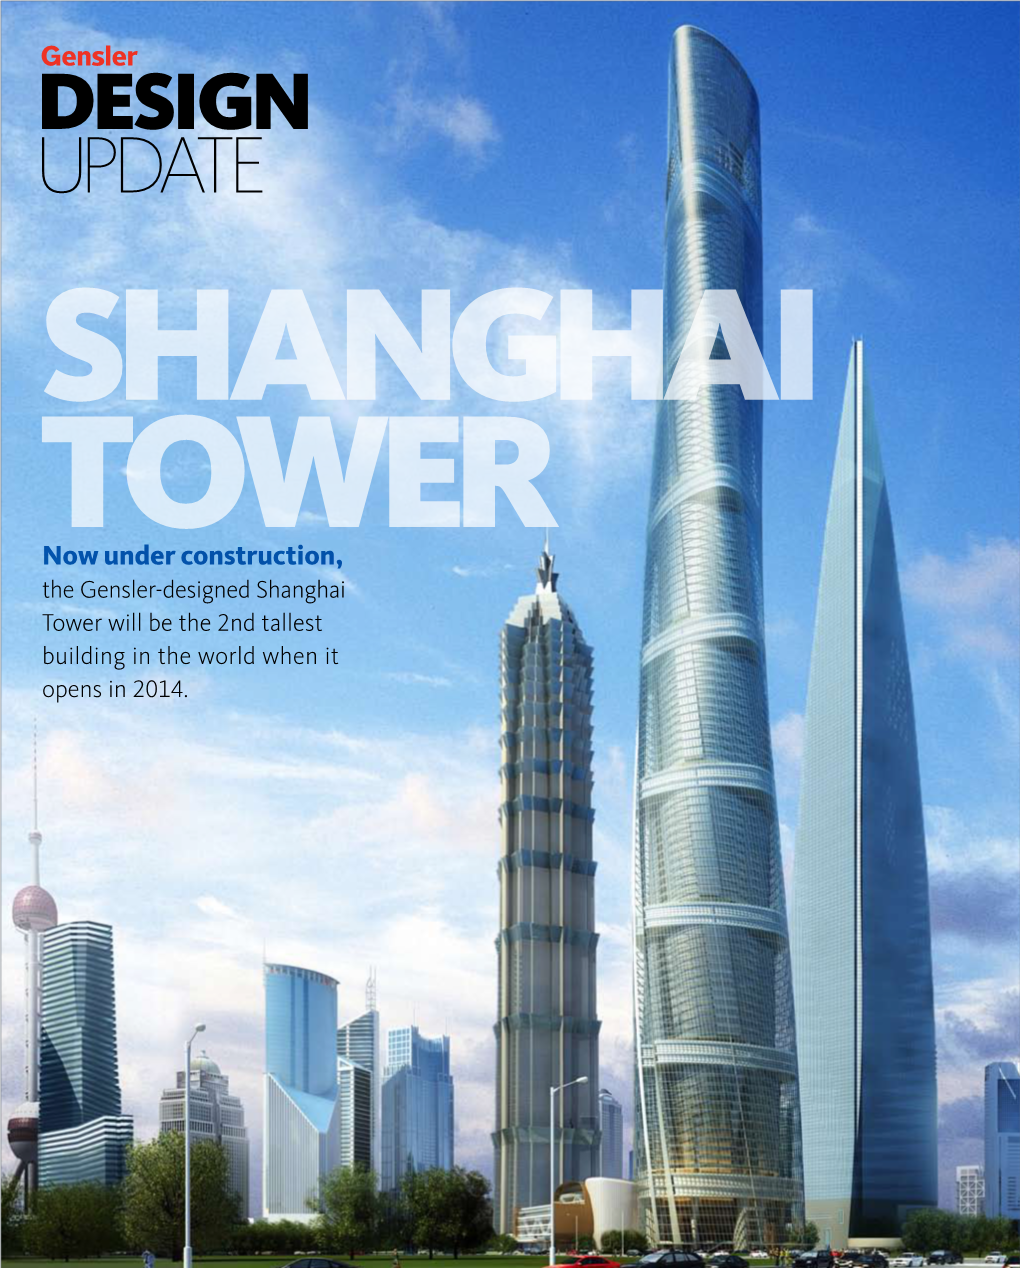 DESIGN UPDATE SHANGHAI TOWER Now Under Construction, the Gensler-Designed Shanghai Tower Will Be the 2Nd Tallest Building in the World When It Opens in 2014